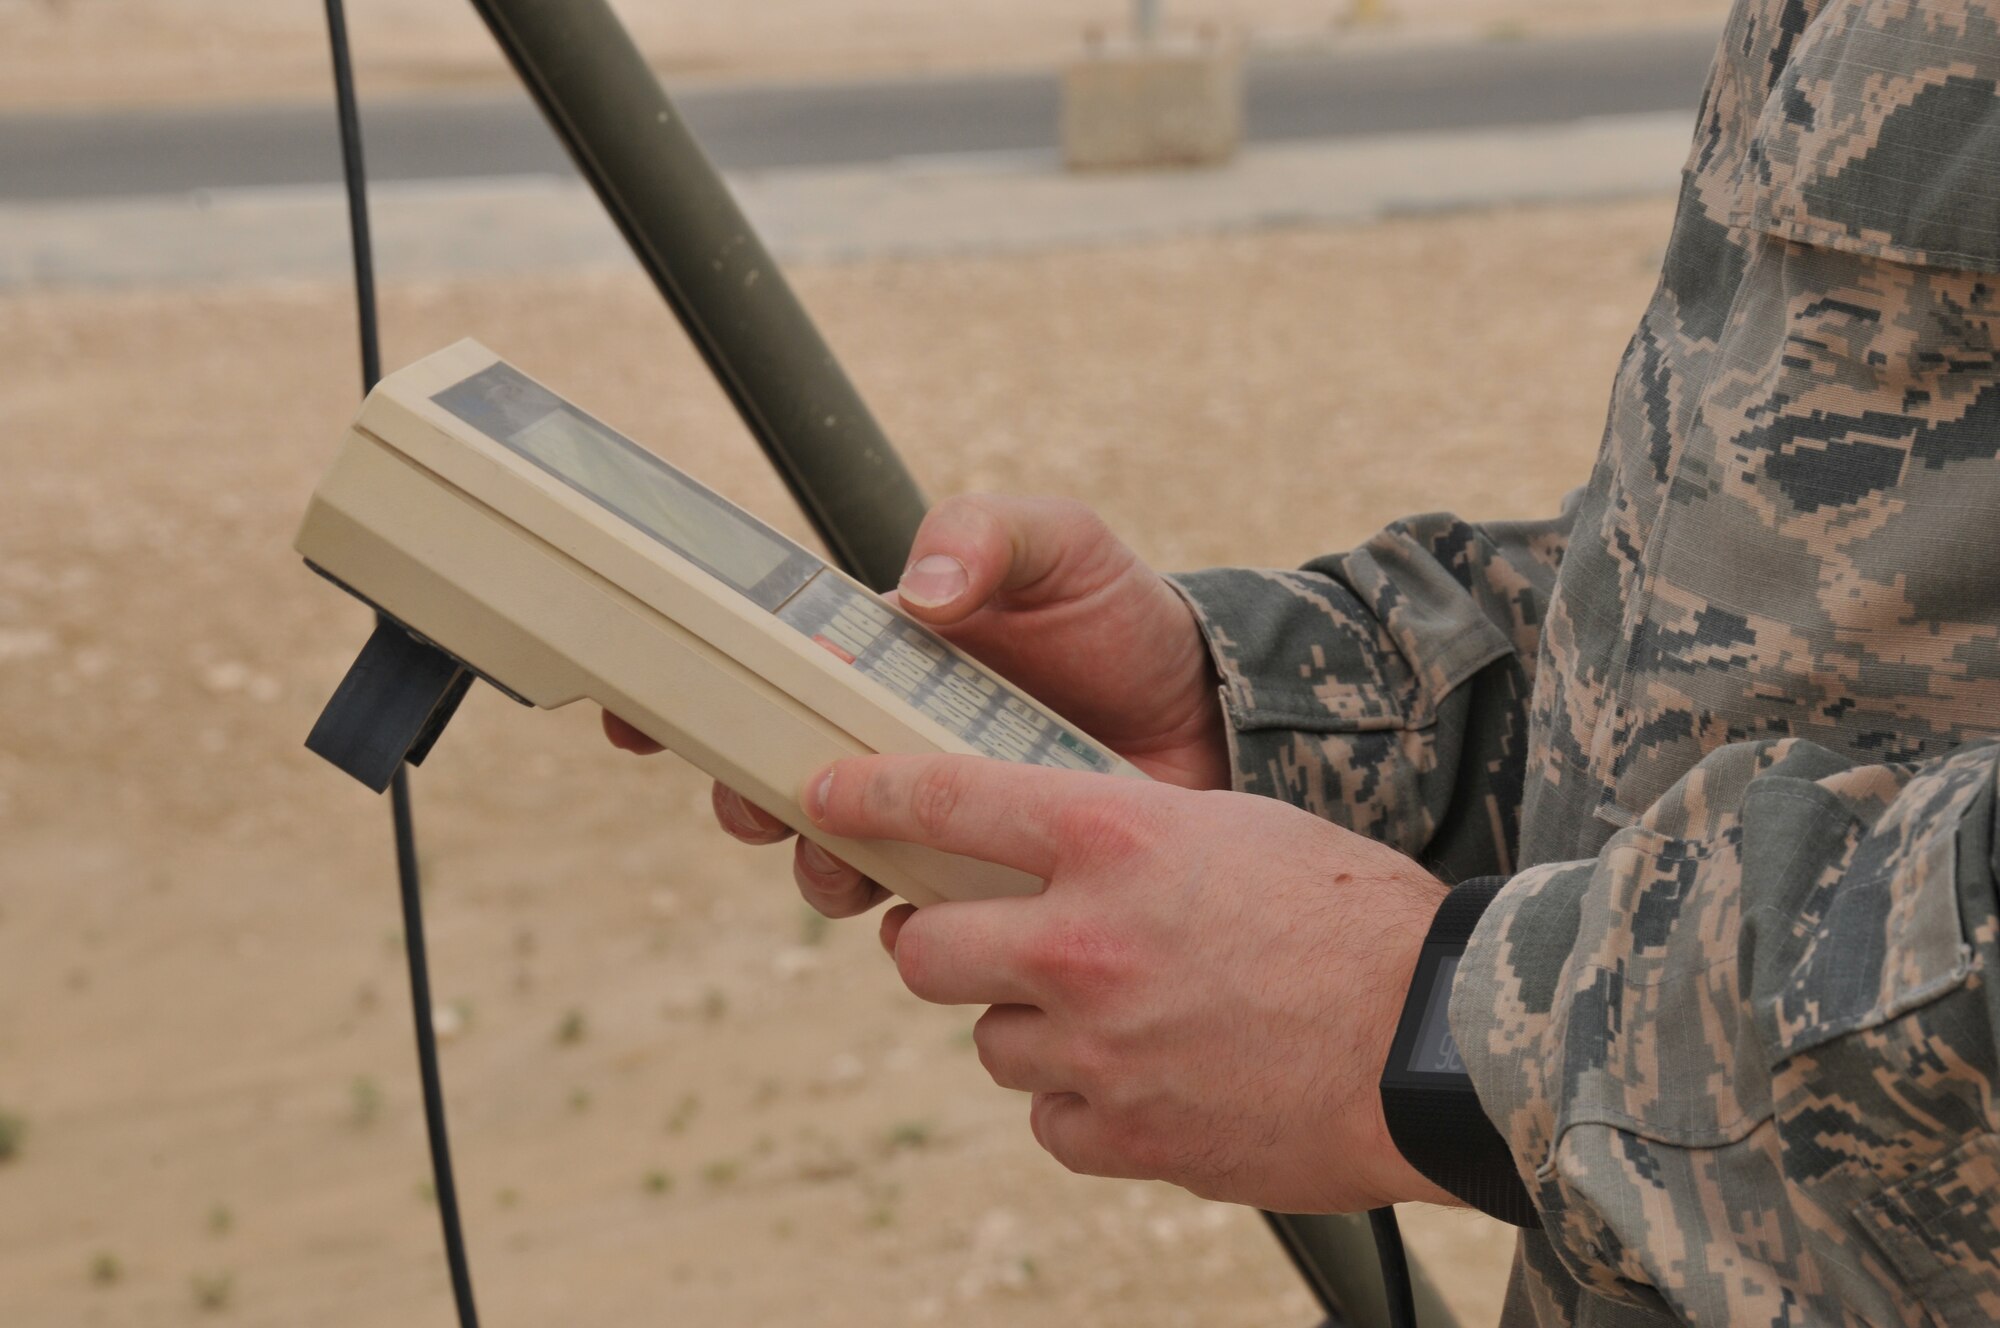 Capt. Matthew Perkins, 379th Expeditionary Operations Support Squadron weather flight commander, takes weather data from the Tactical Meteorological Observing System March 17 at Al Udeid Air Base, Qatar. Attached to the TMOS is a rain gauge, anemometer that reads wind speed and direction; a lightening sensor and a ceilometer, that tells how high the clouds are. (U.S. Air Force photo by Tech. Sgt. Terrica Y. Jones/Released)